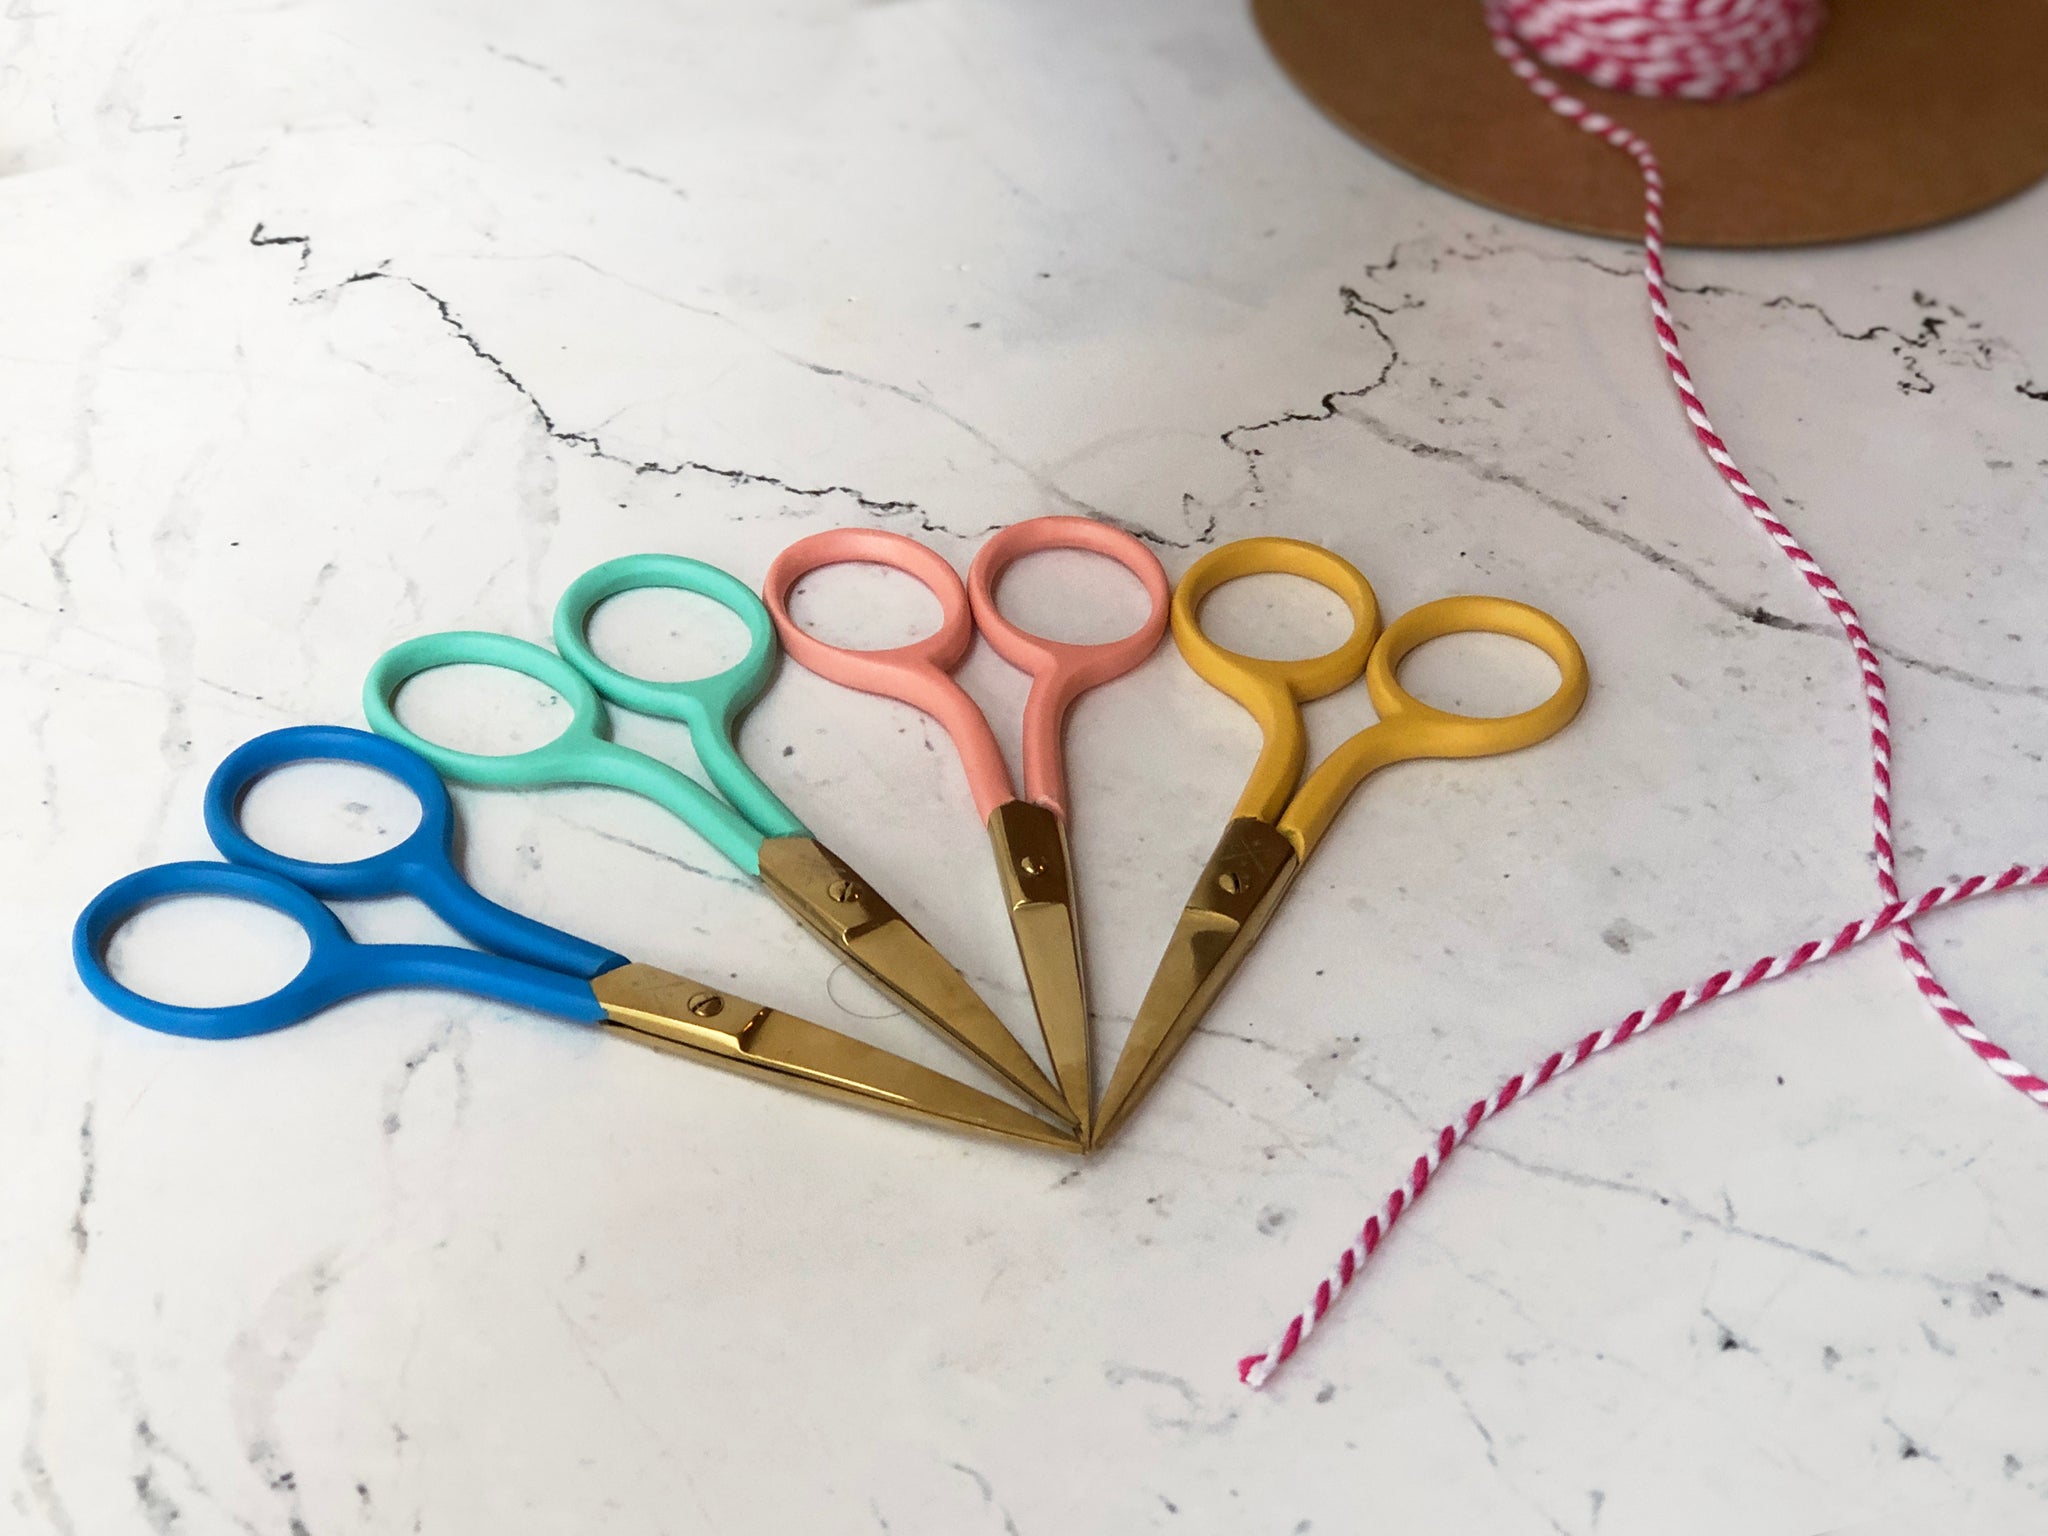 Chasing Threads Pink Embroidery Scissors – Hatch Goods